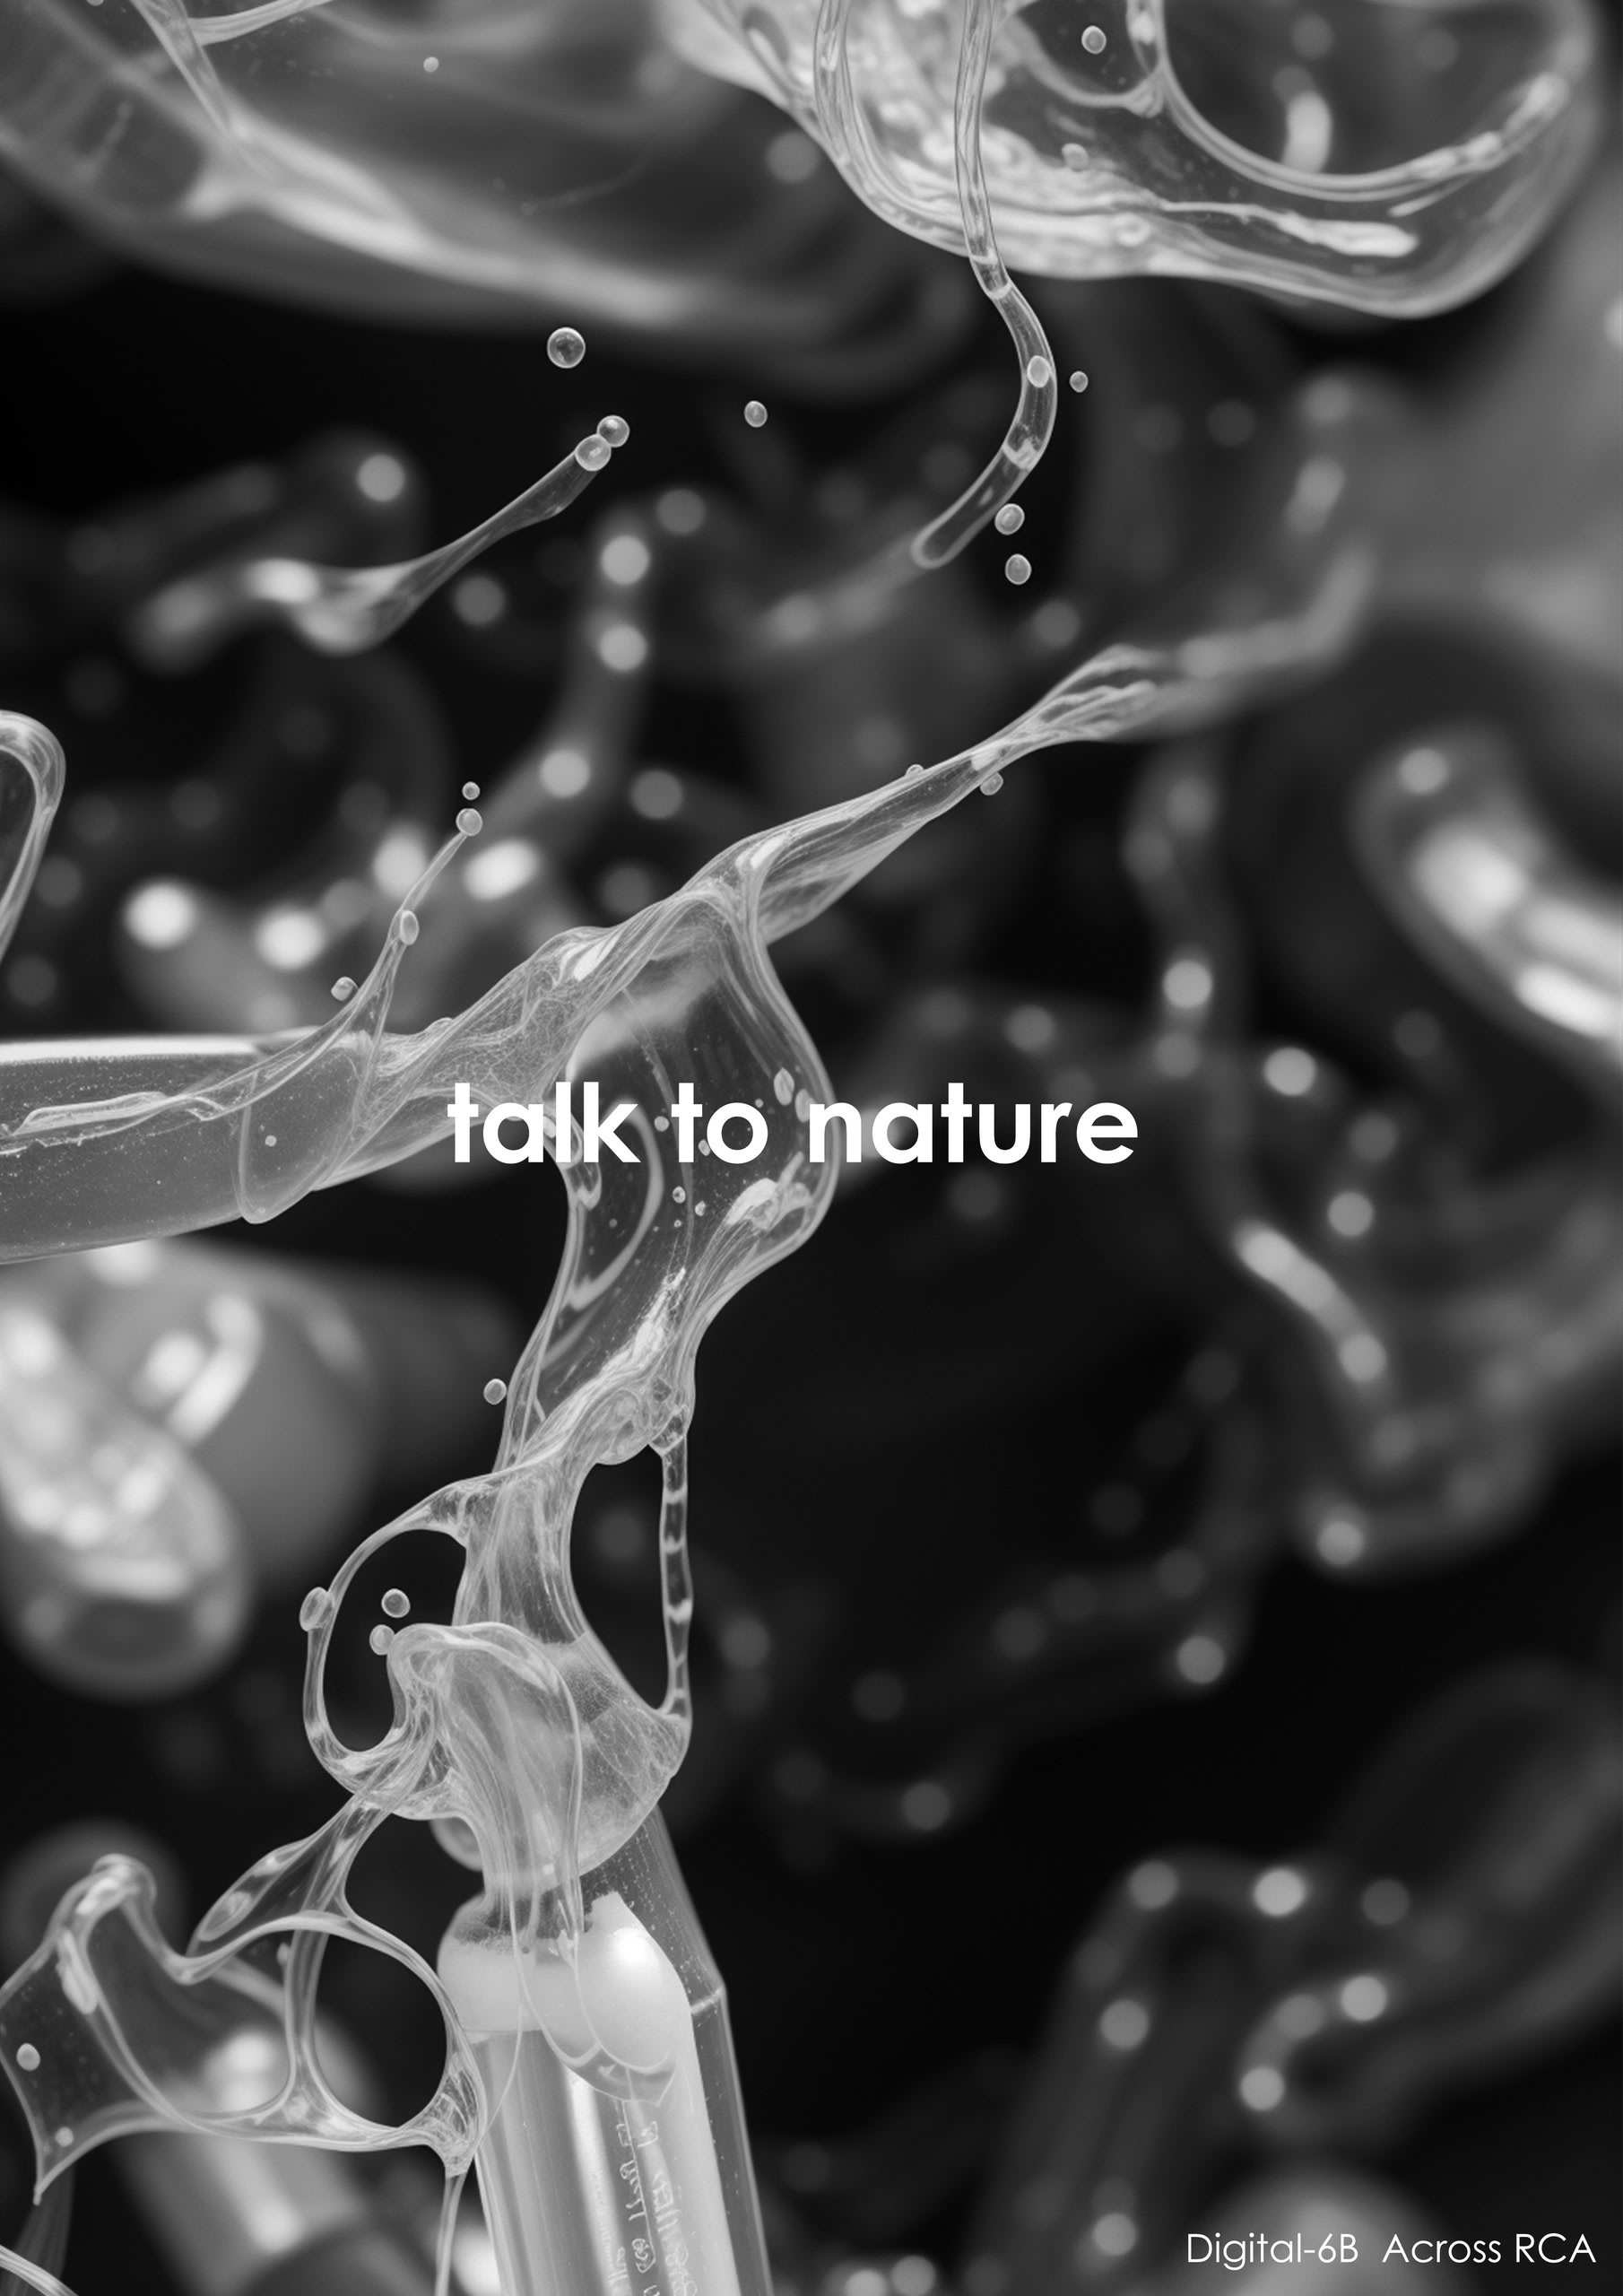 Talk to nature